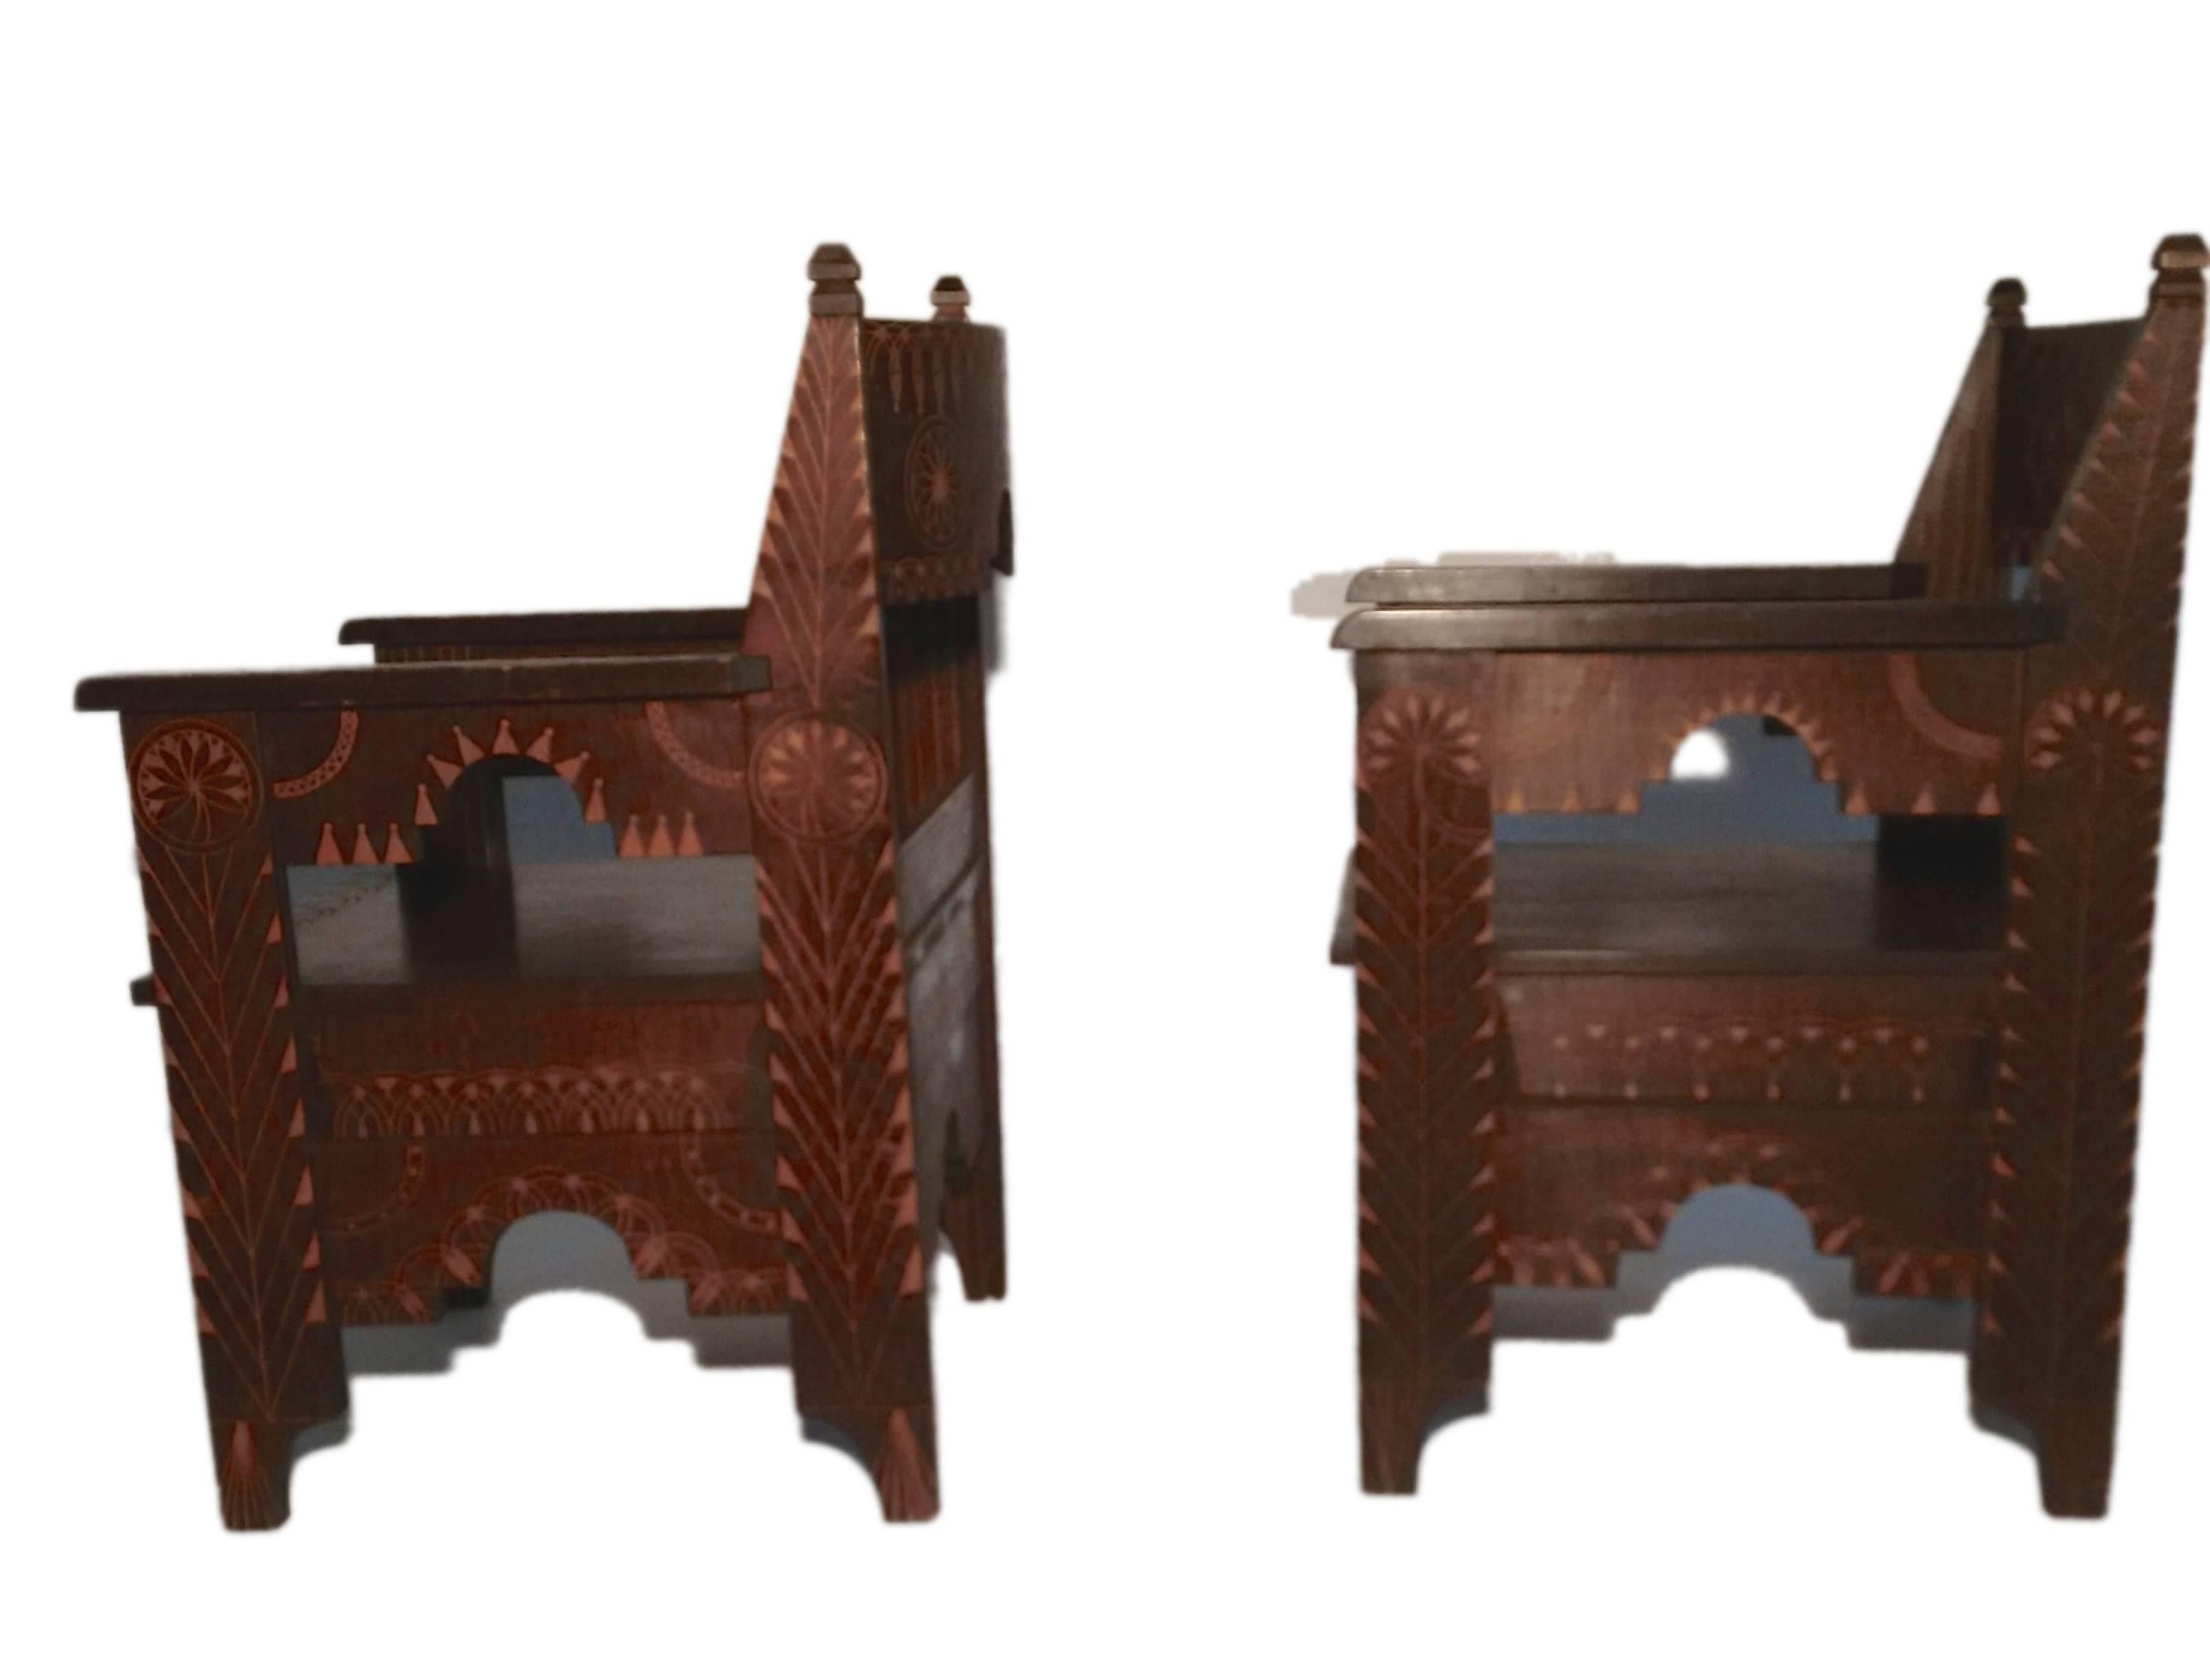 This is a very interesting and articulate pair of wooden chairs with carved Moorish pattern. Clearly a pair, they do differ slightly in pattern and there is a small height different between the two. Resembling a Classic design of Spanish wooden